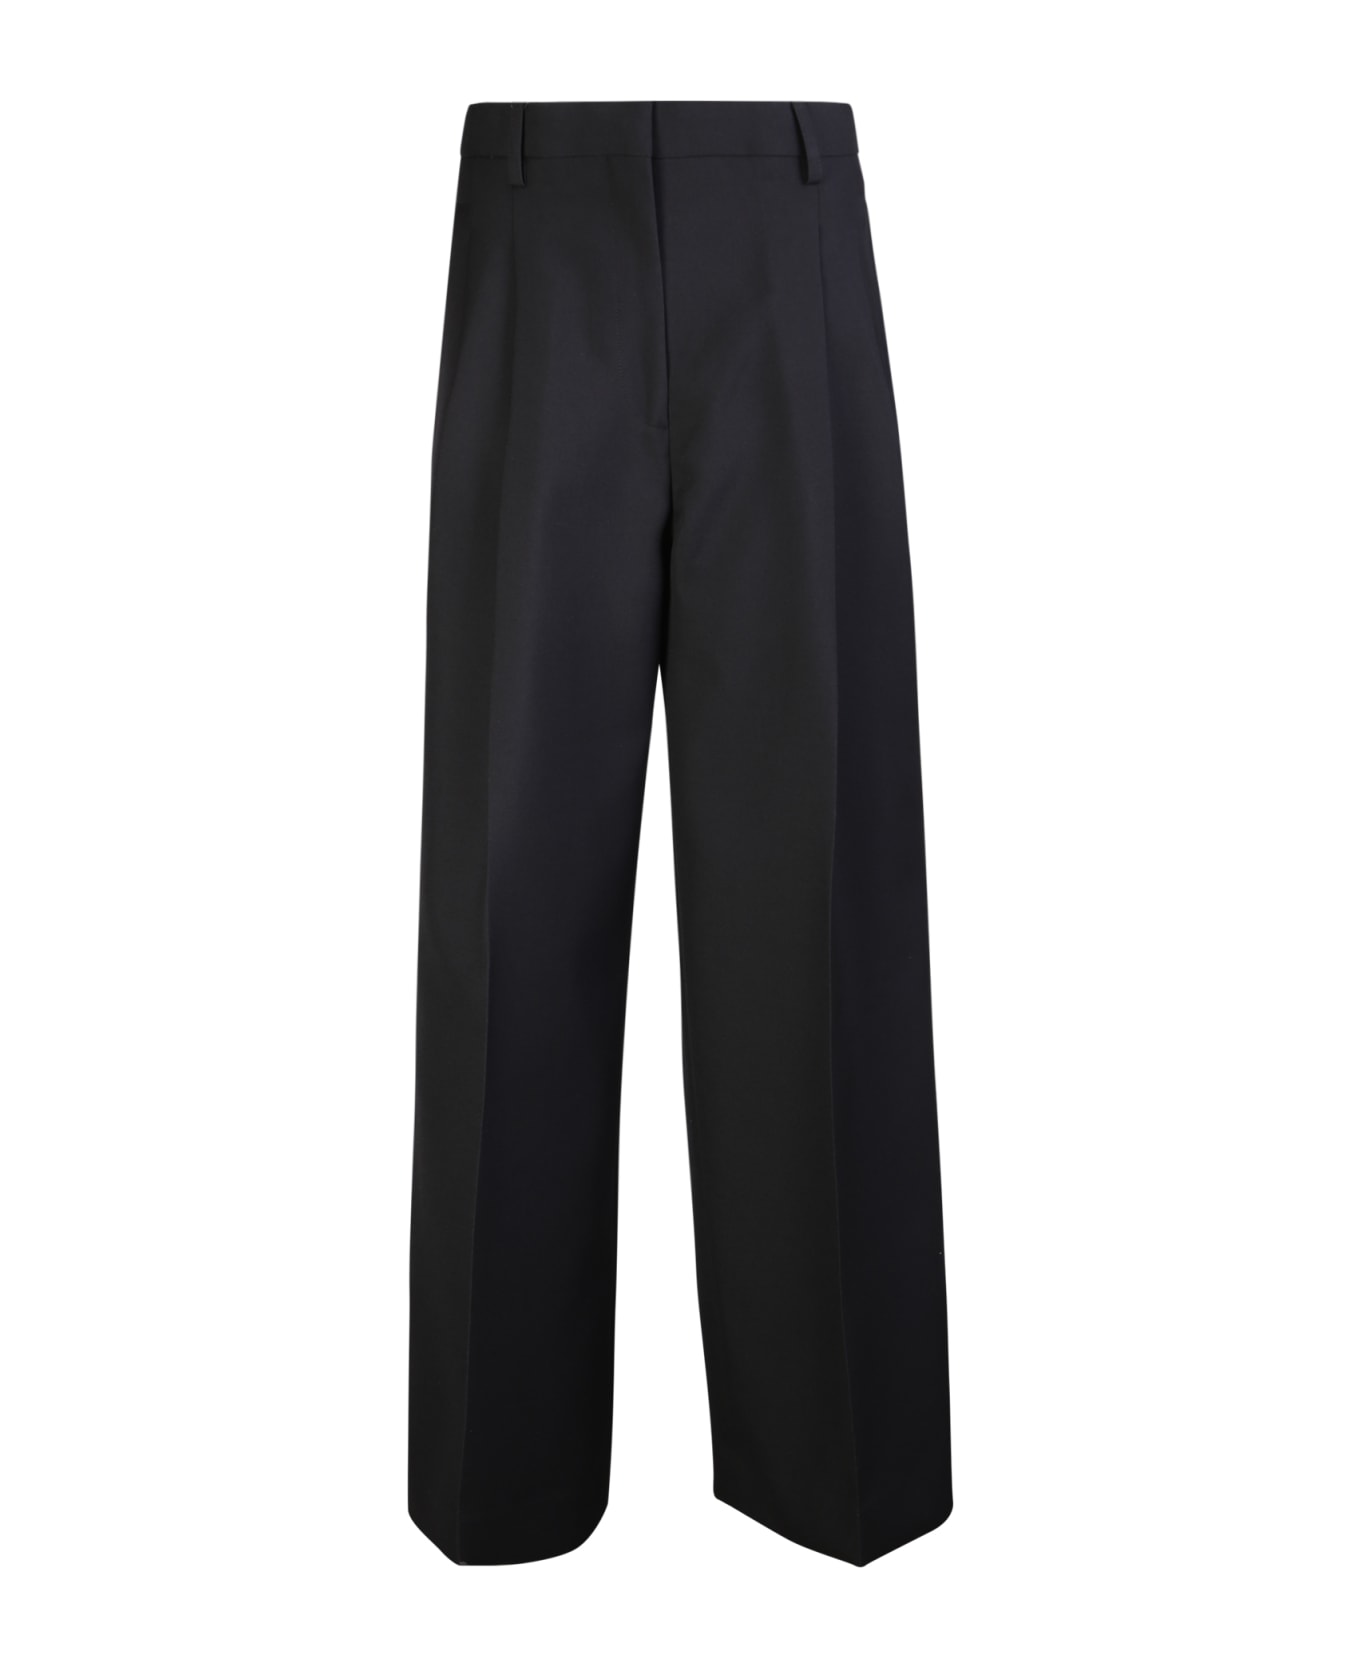 Burberry Madge Tailored Trousers - Black